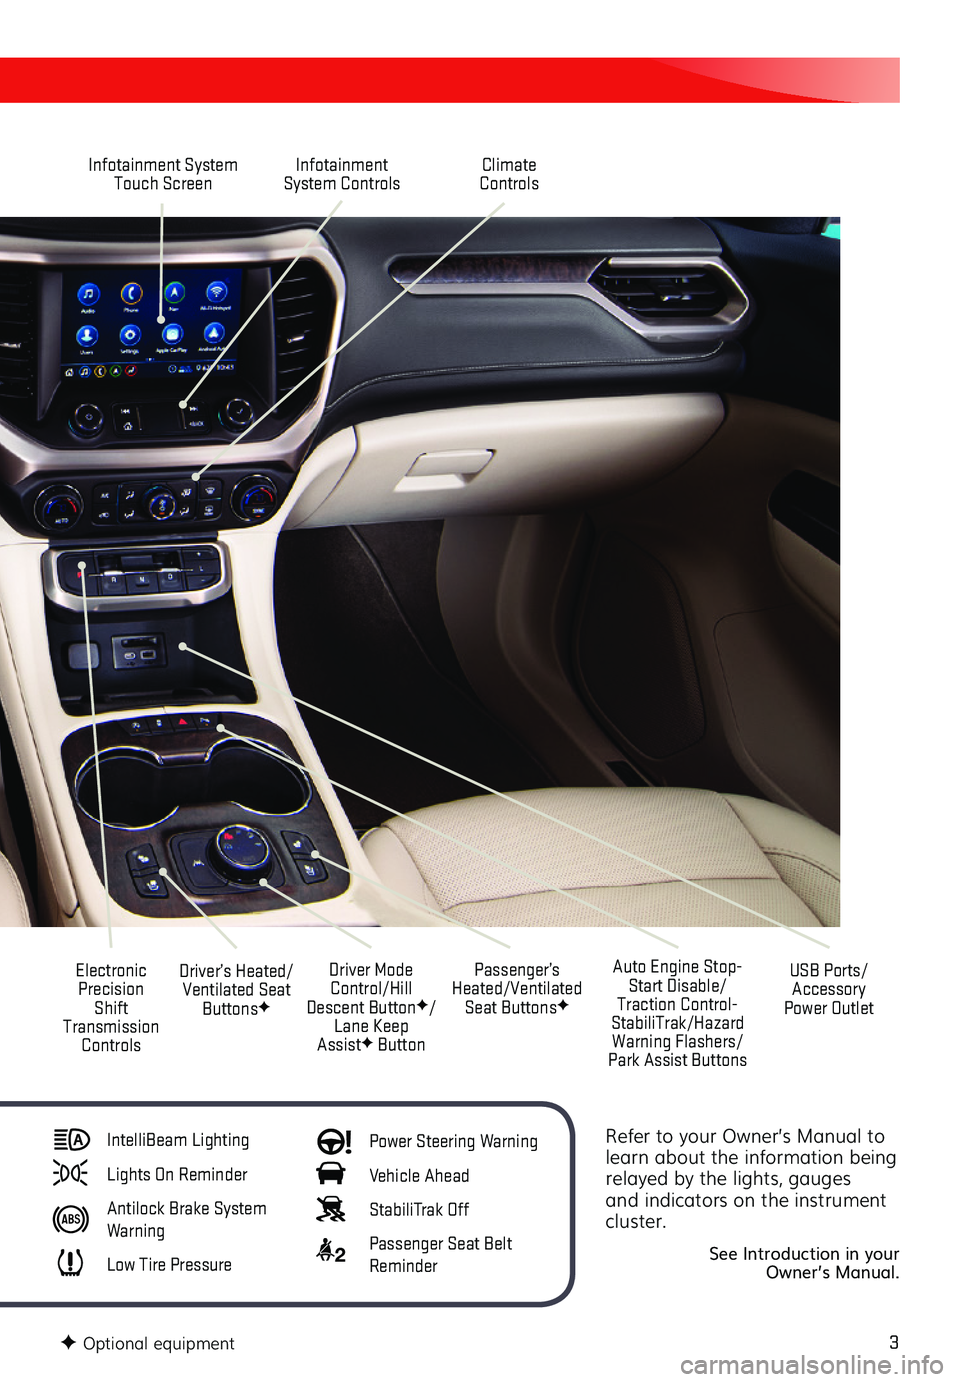 GMC ACADIA 2020  Get To Know Guide 3
Refer to your Owner’s Manual to learn about the information being relayed by the lights, gauges and indicators on the instrument cluster.
See Introduction in your  Owner’s Manual.
Infotainment S